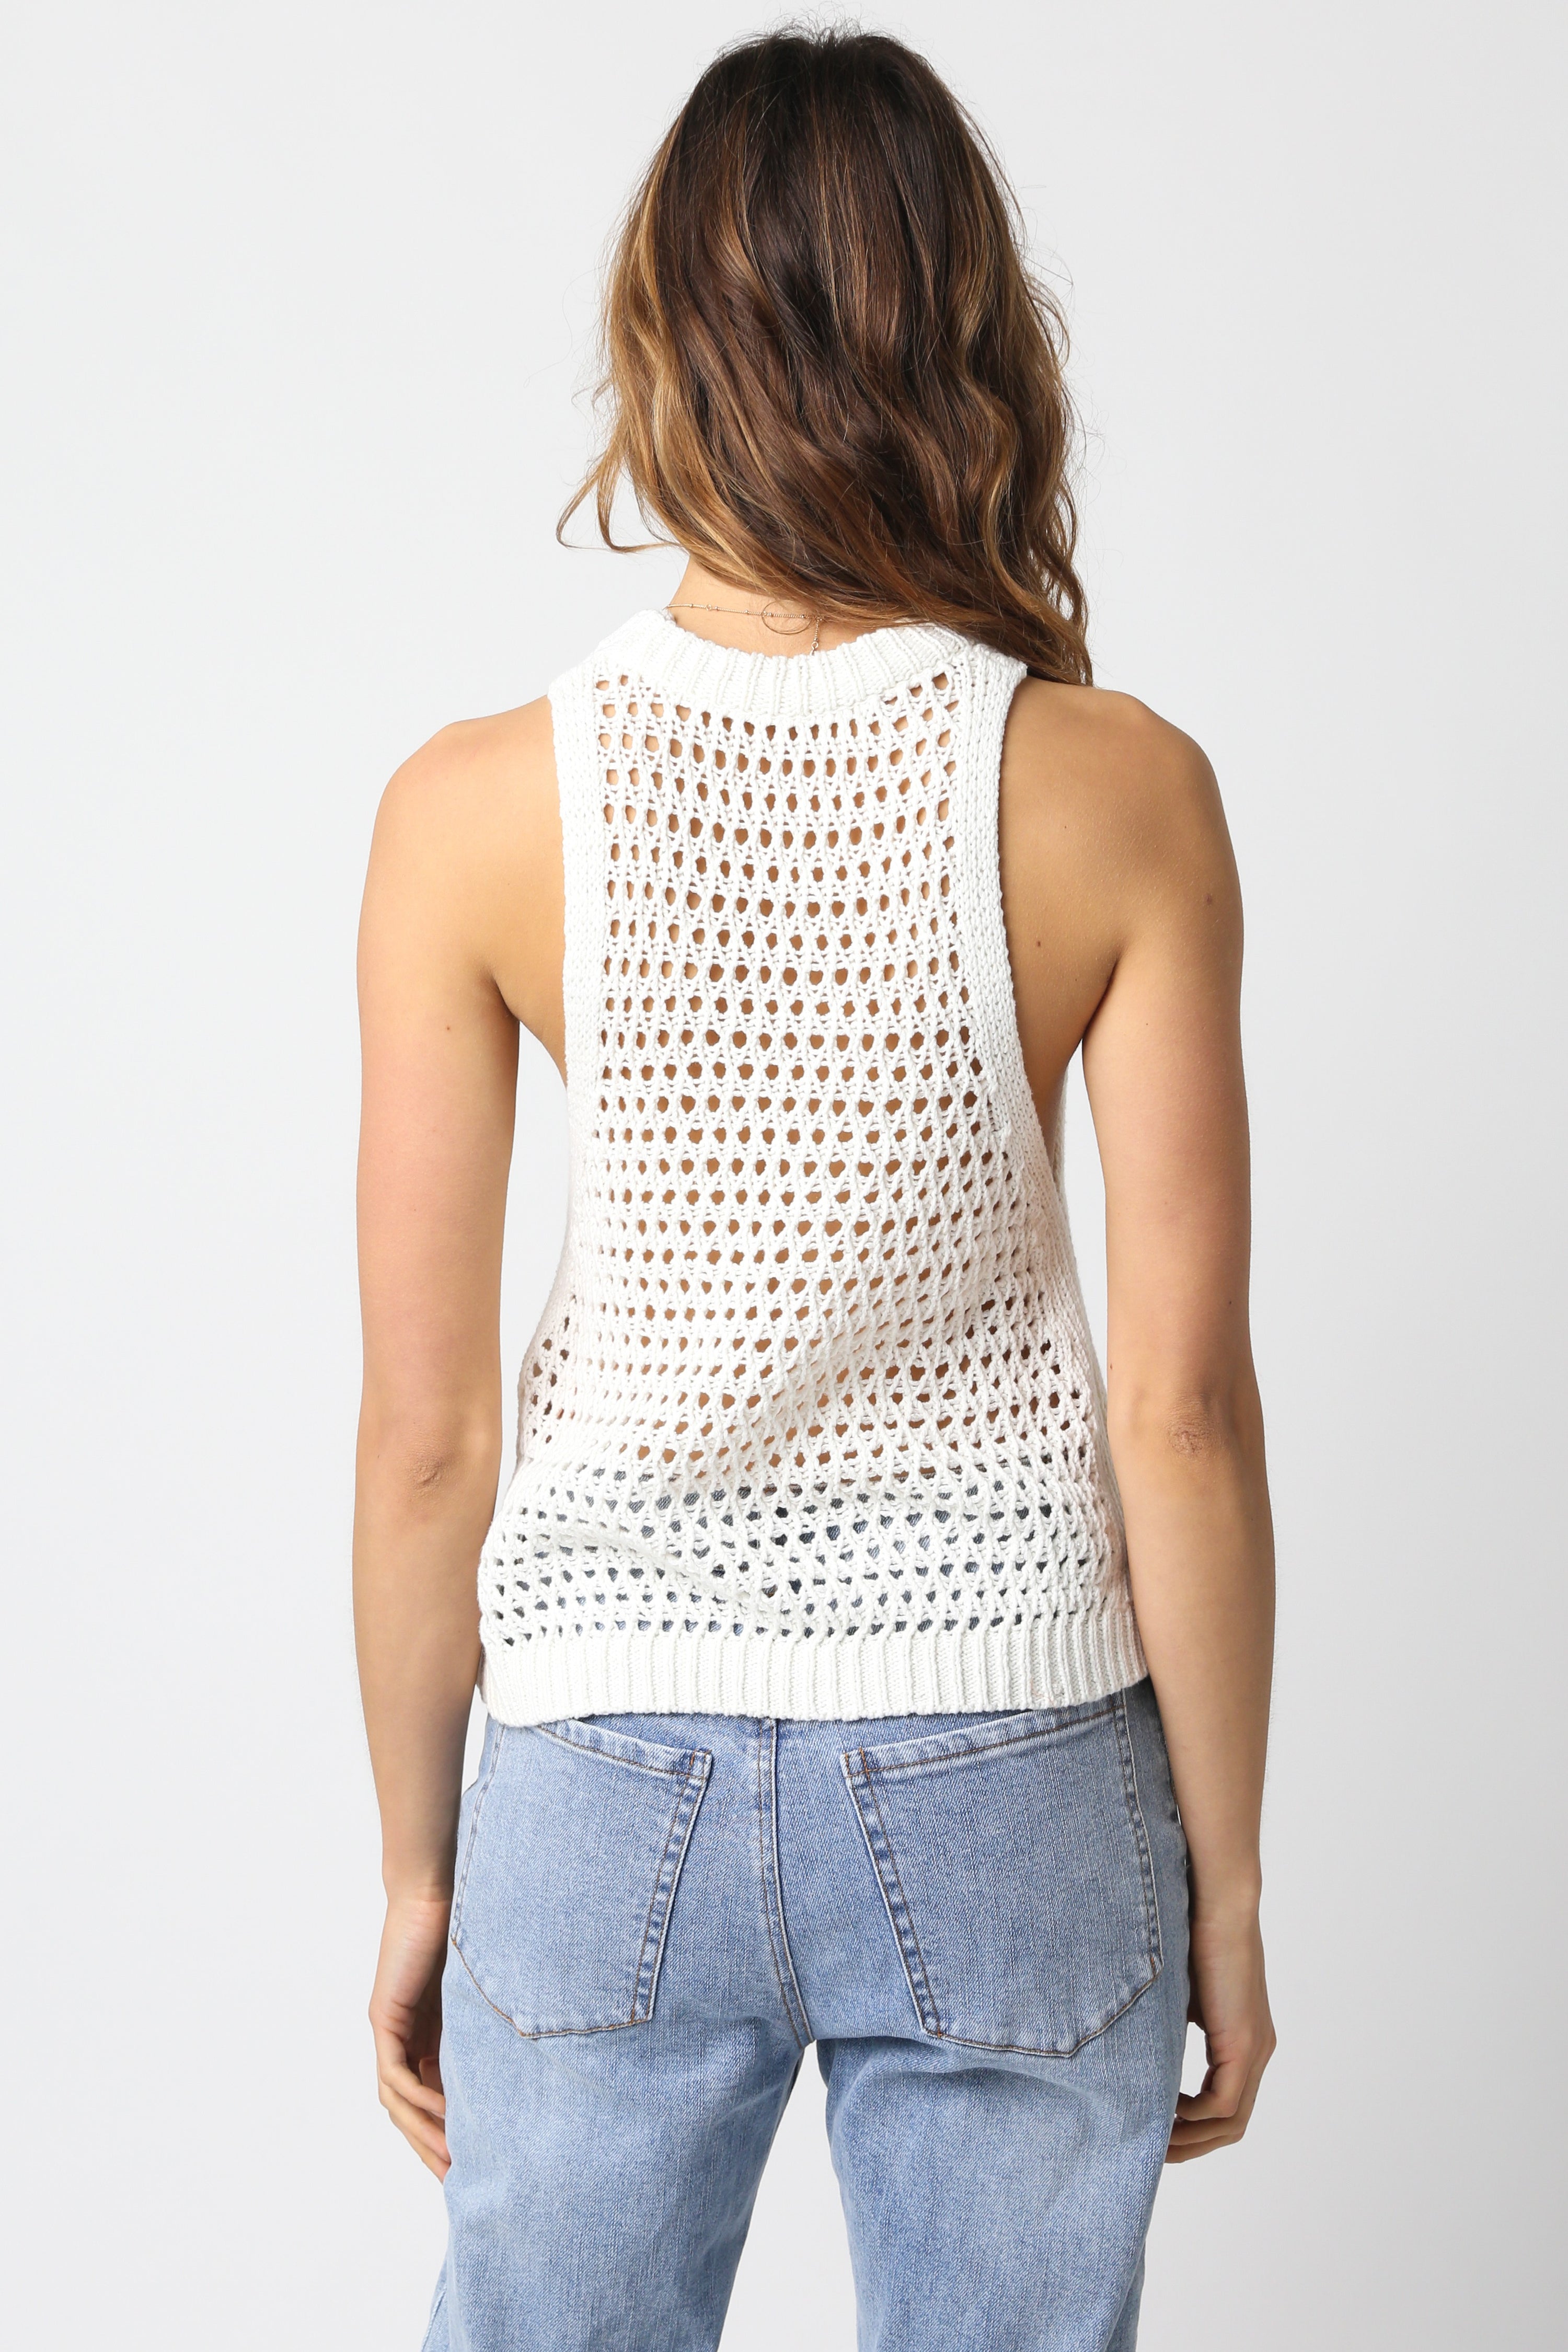 White Lily Top